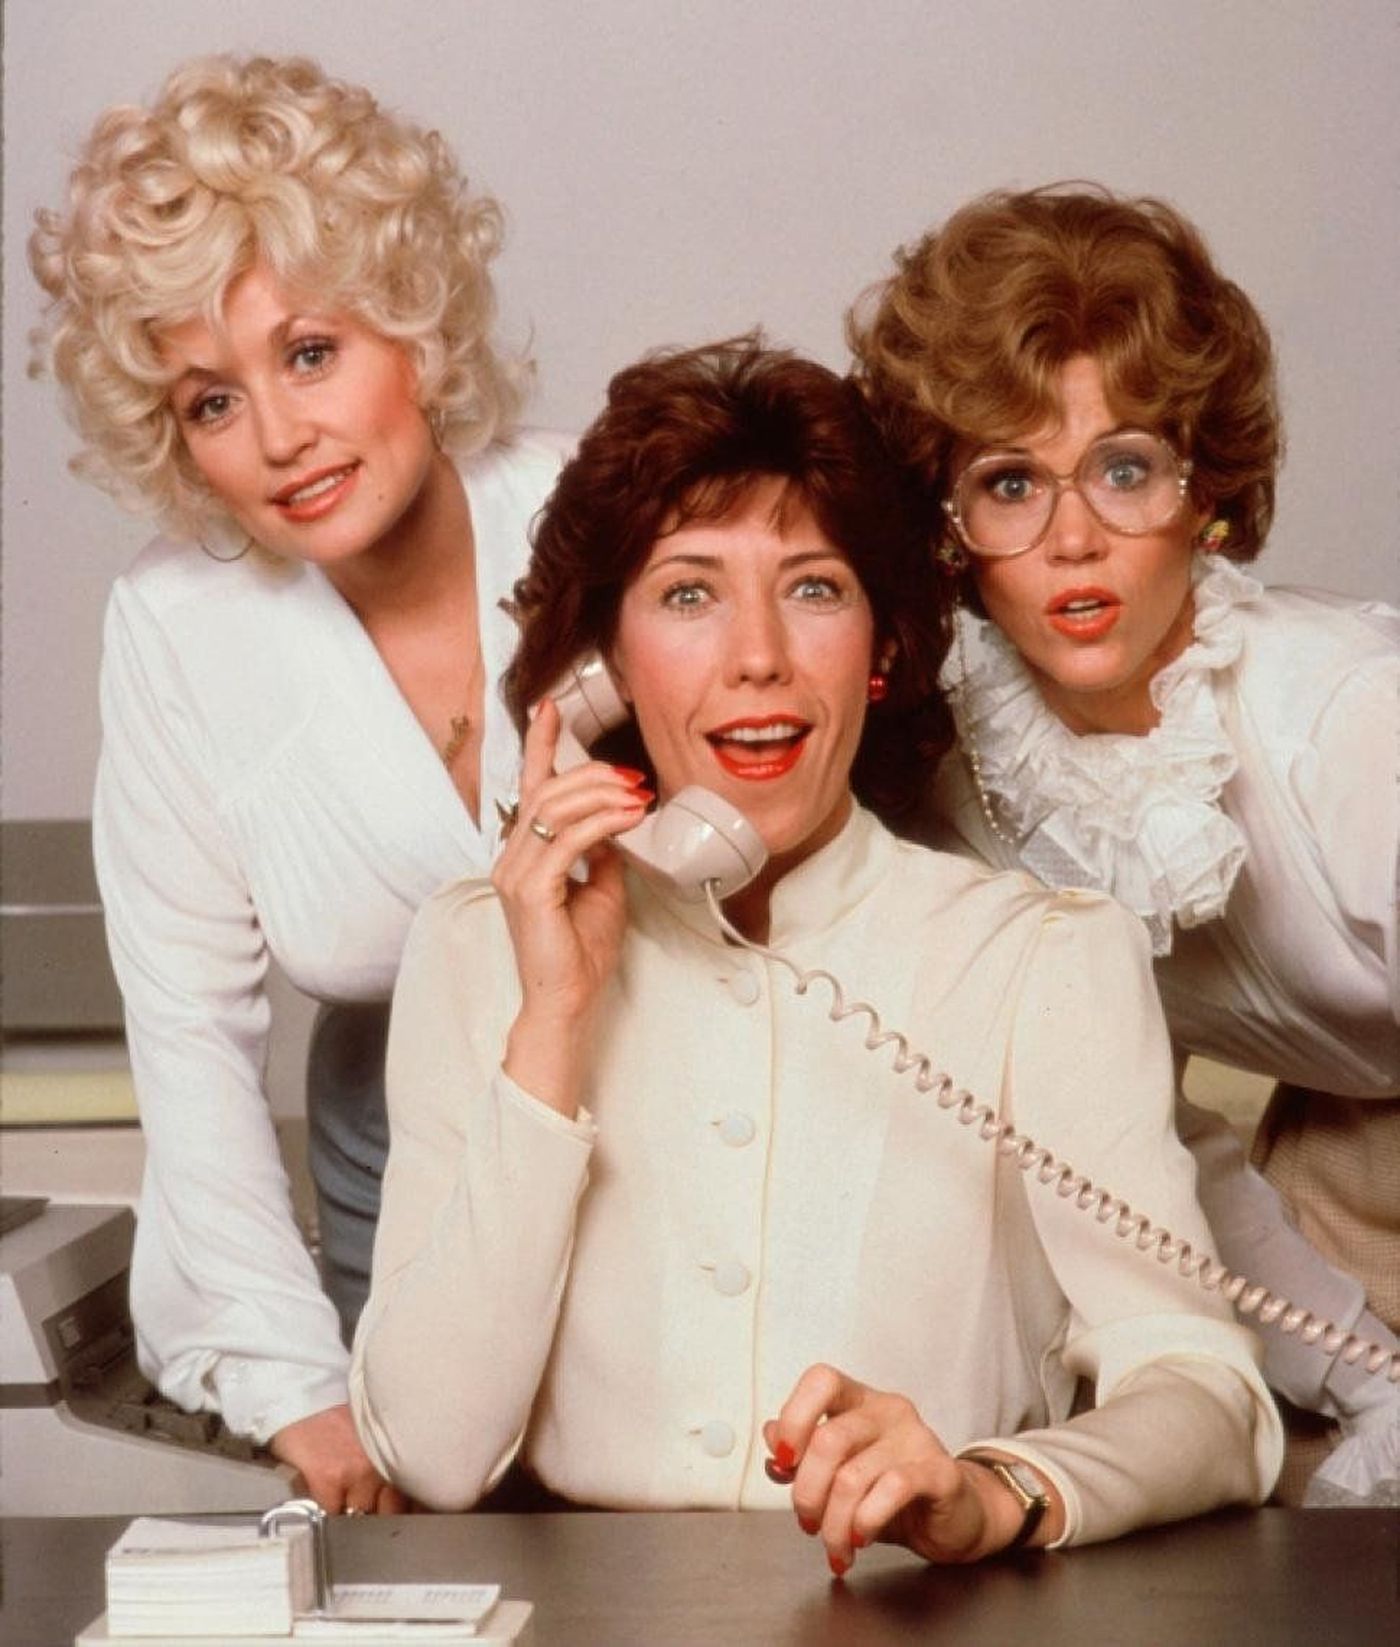 Dolly Parton, Lily Tomlin, and Jane Fonda in the original 9 TO 5